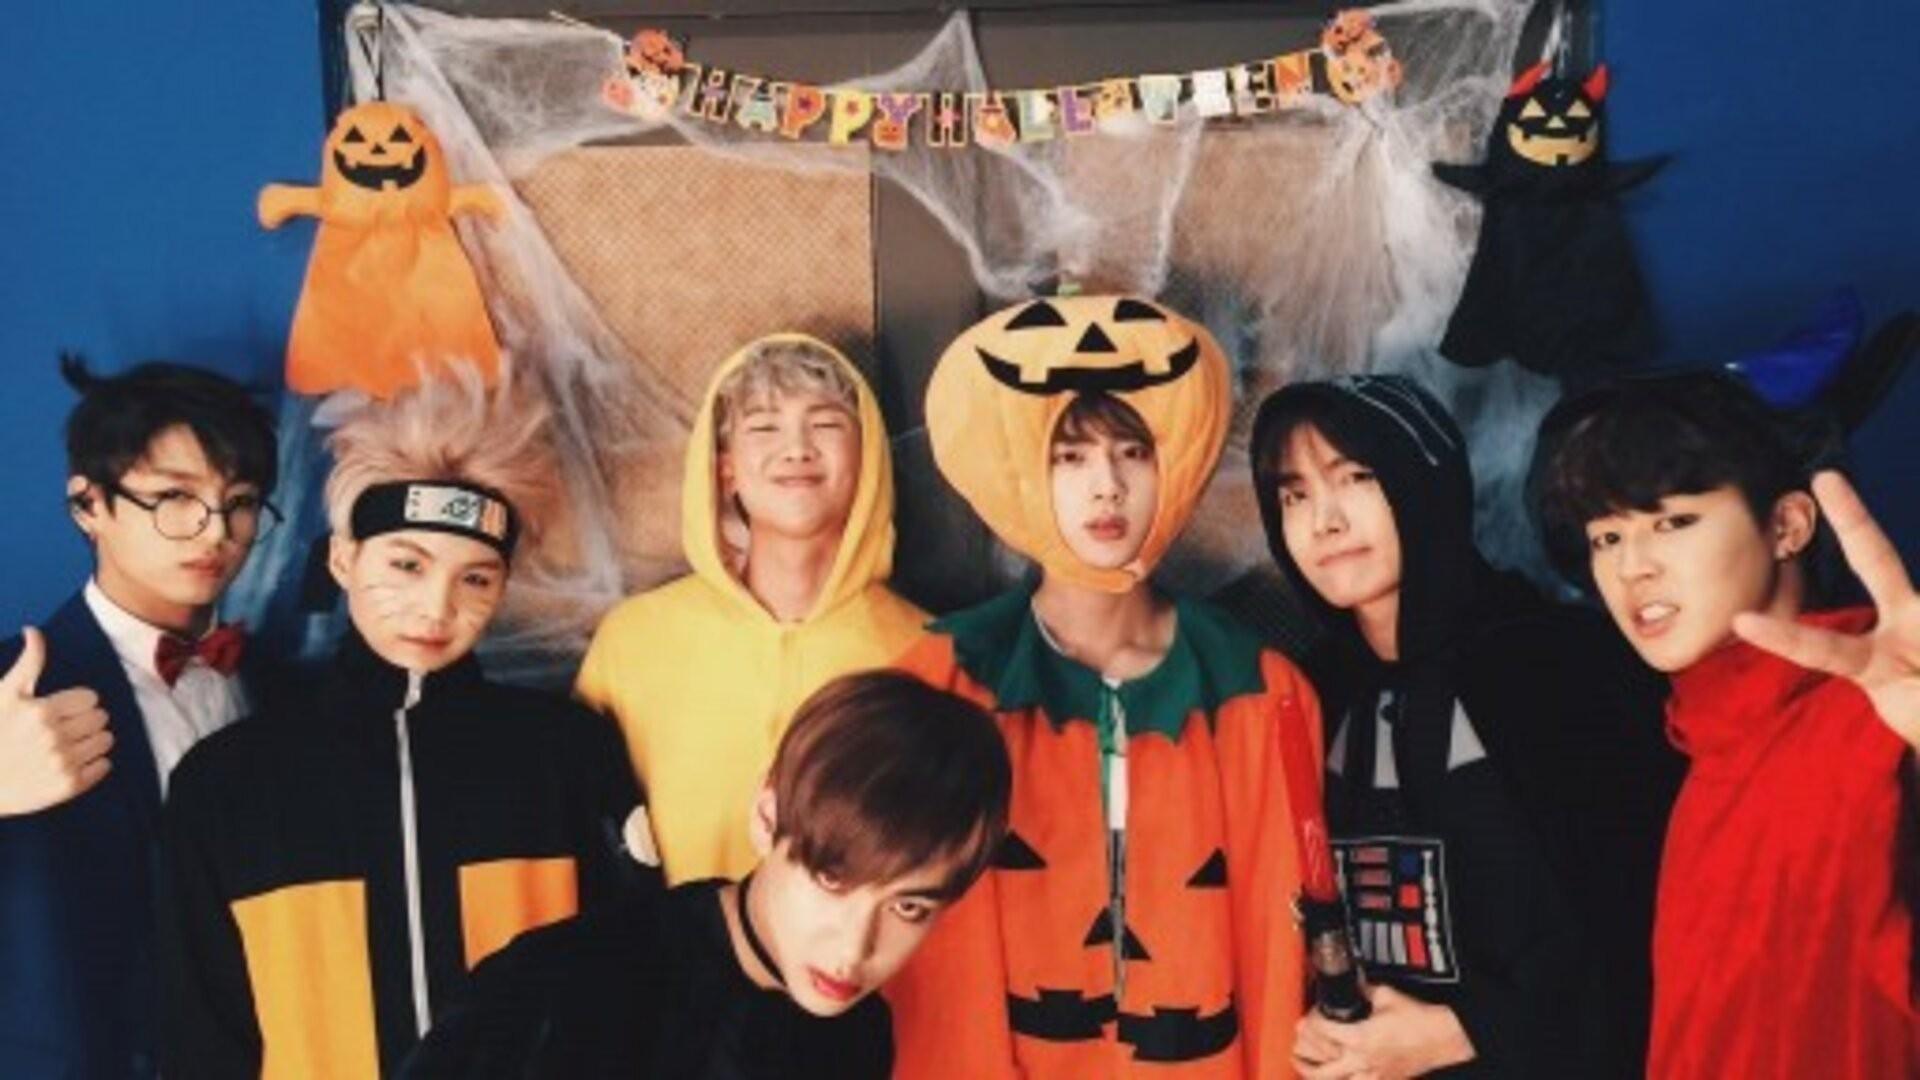 Halloween Party with BTS